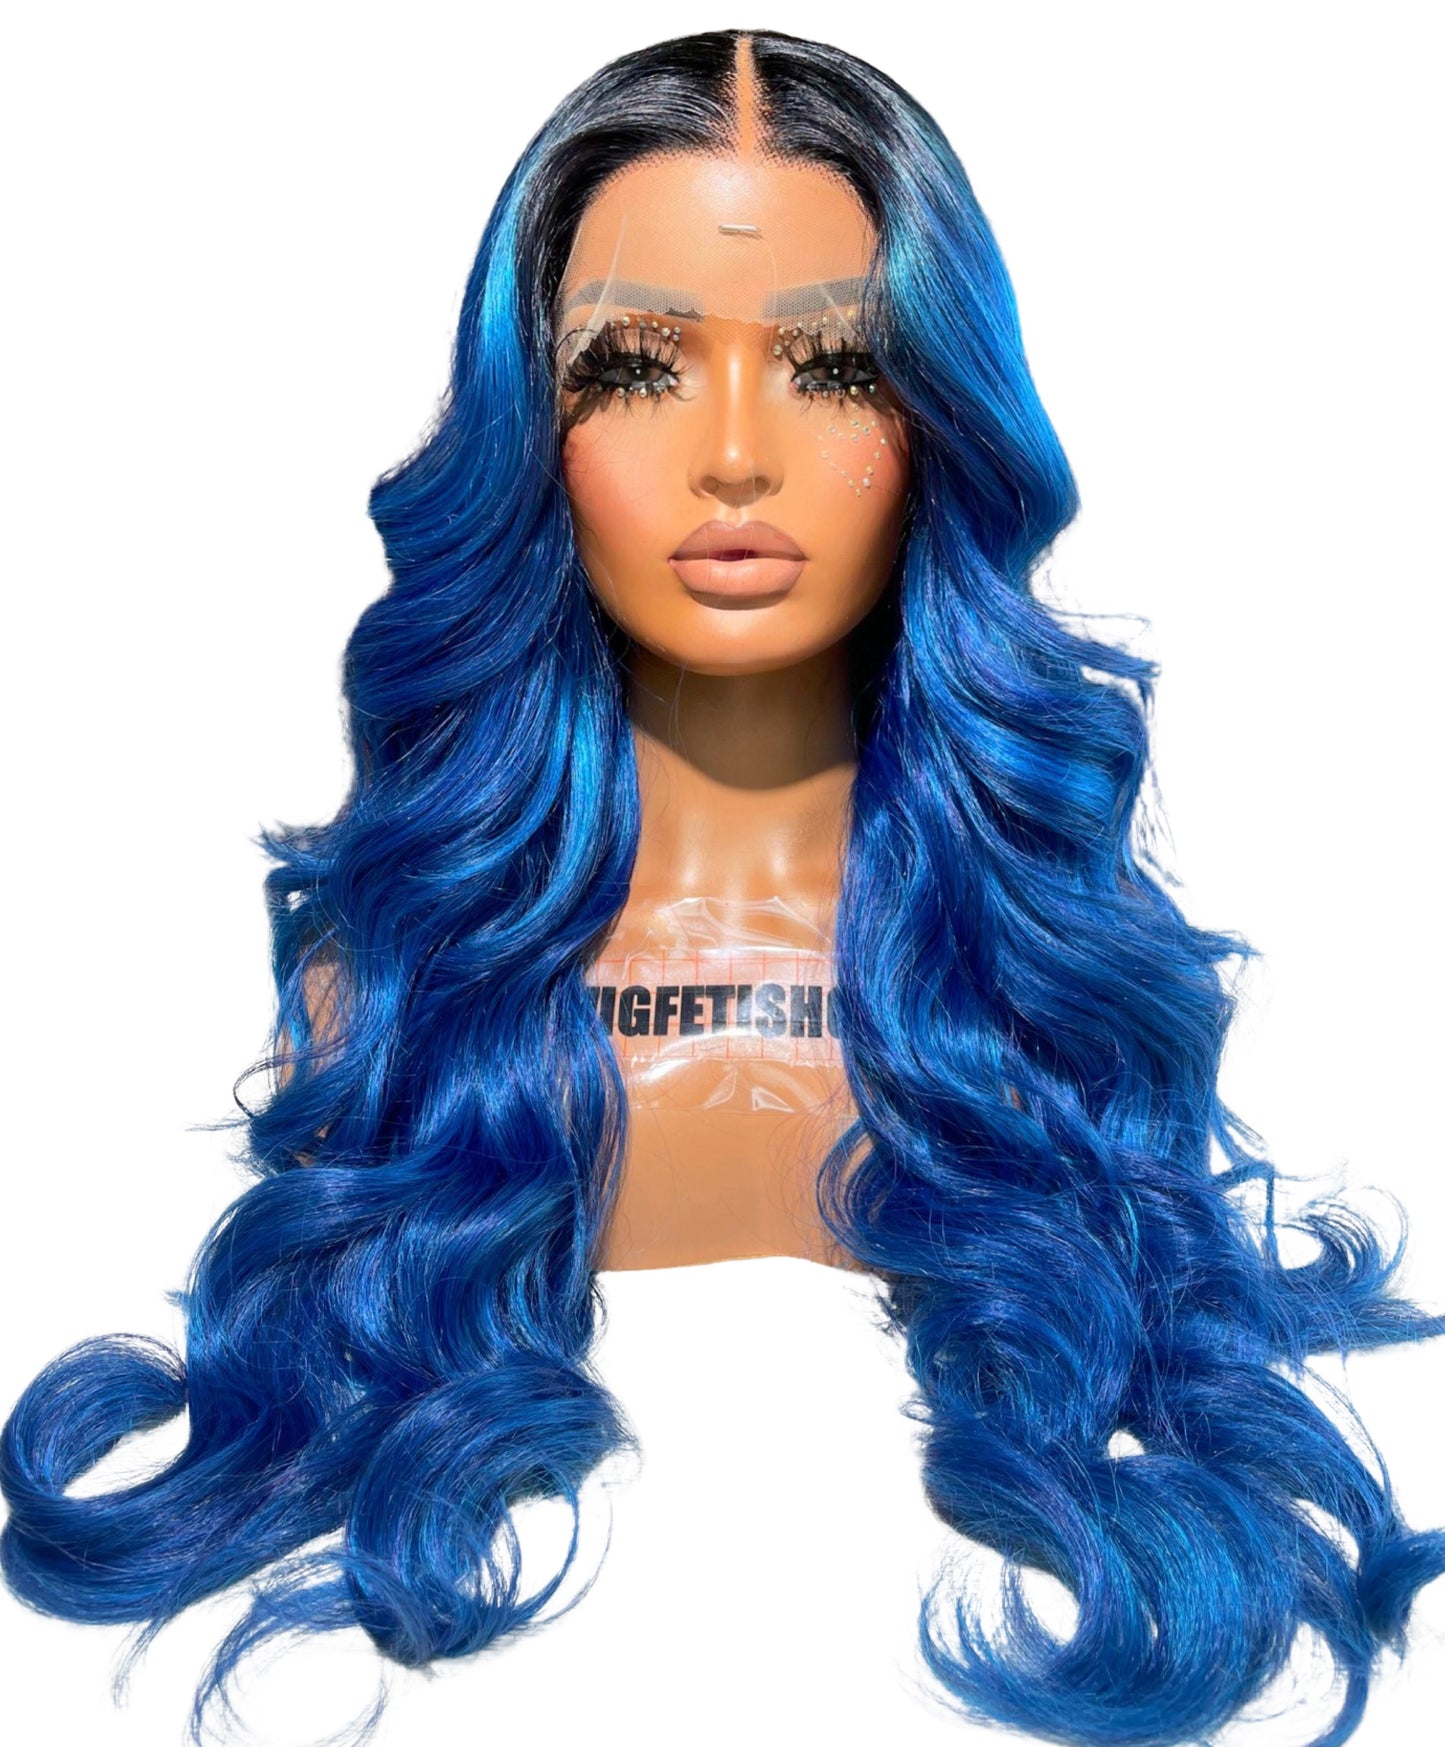 HD LACE 30 INCH T PART (GLUELESS) BODY CURLY SAPPHIRE WIG